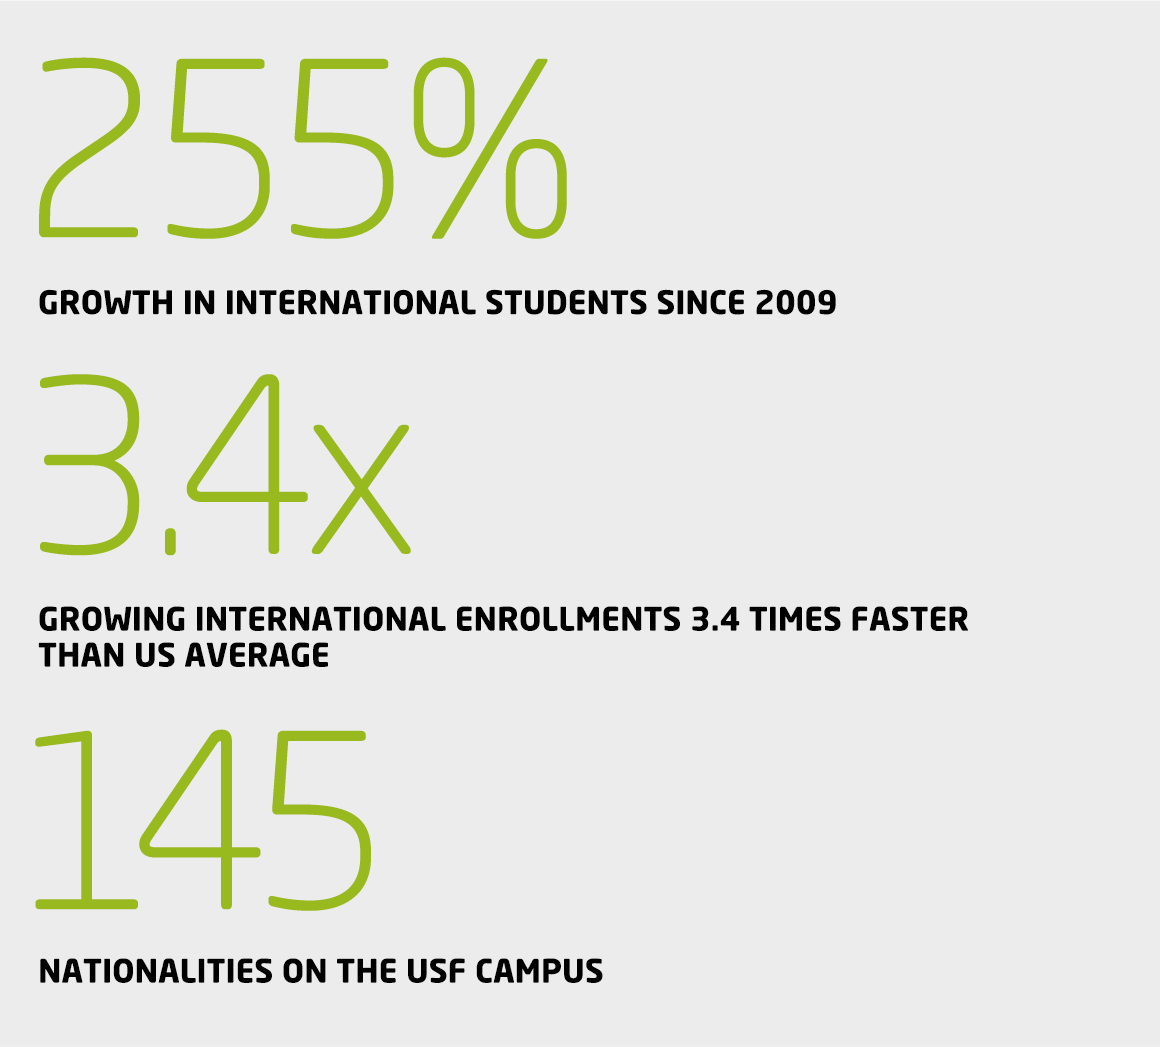 Infographic showing 255% growth in international students at University of South Florida since 2009, outpacing average US university growth by factor of 3.4. 145 nationalities on USF campus.